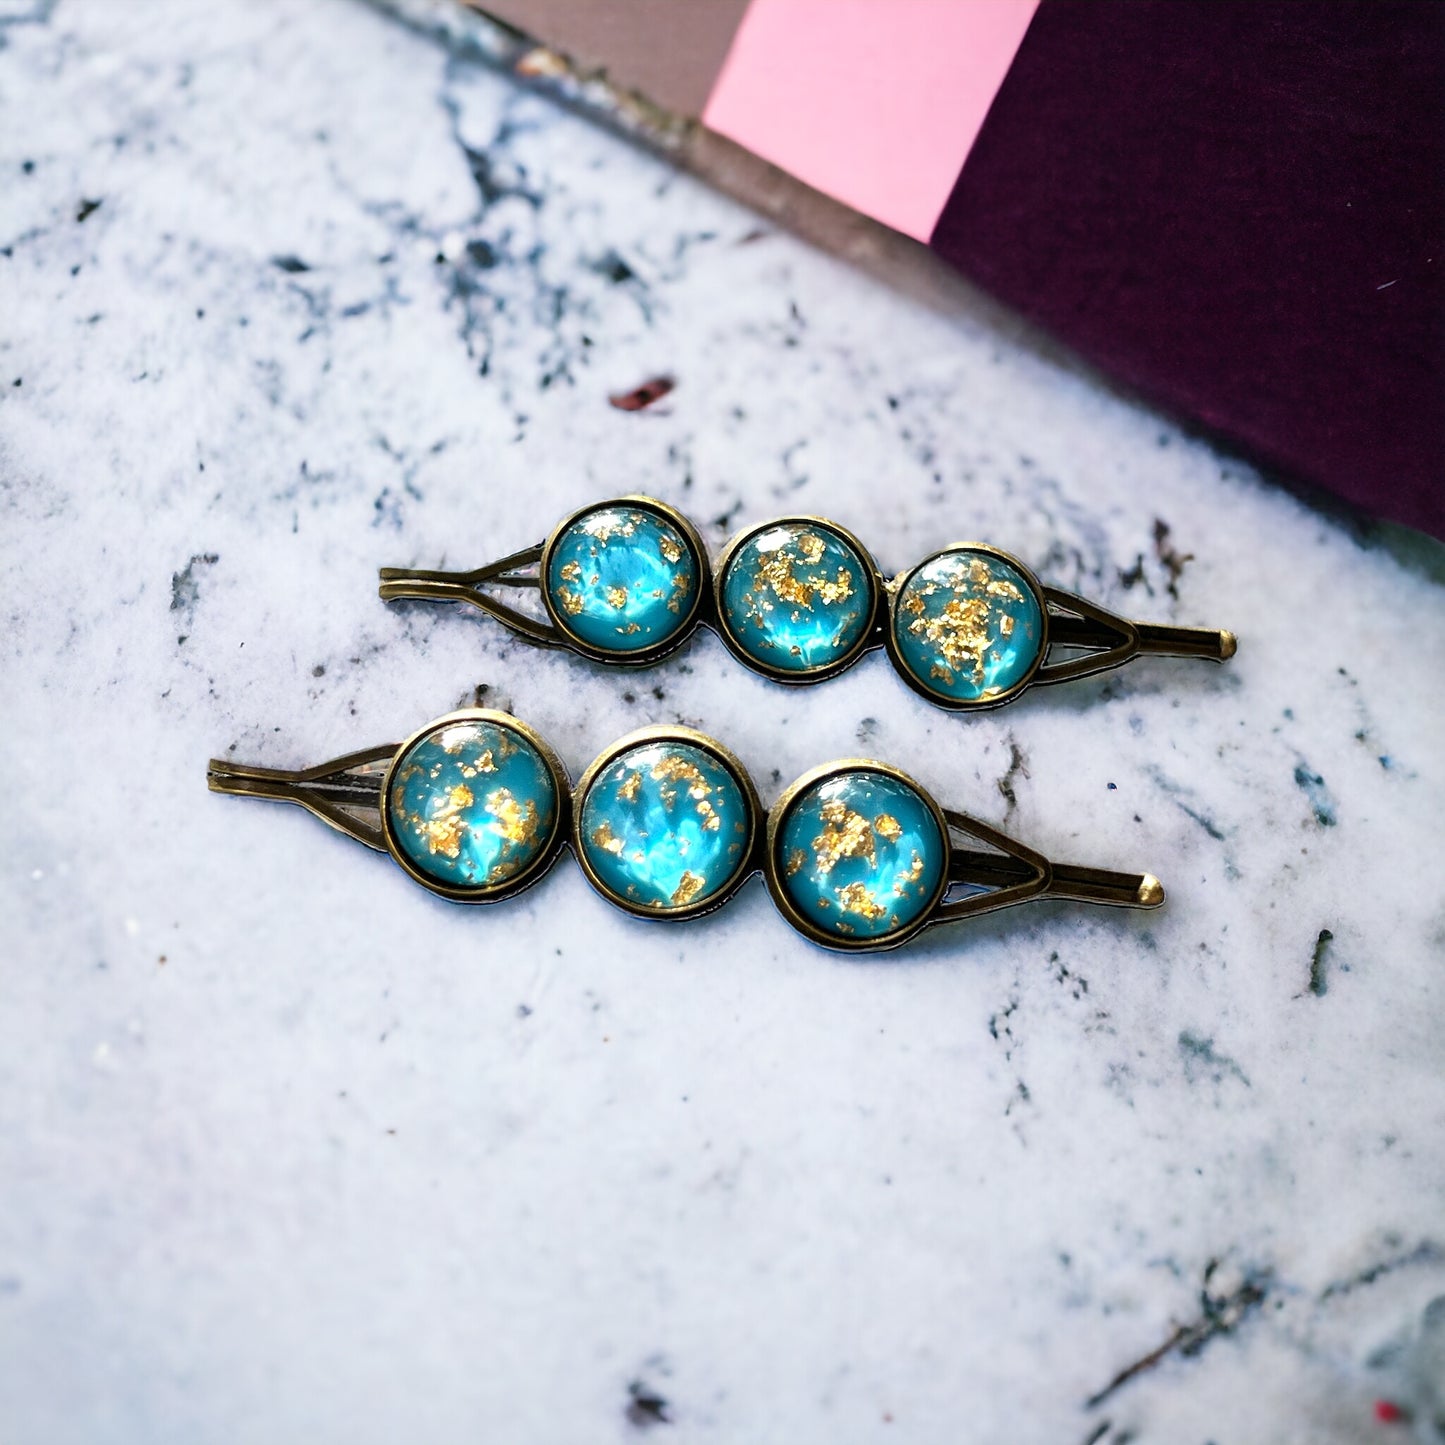 Turquoise Blue Gold Flake Glitter Hair Pins: Sparkling Accessories for Glamorous Styles